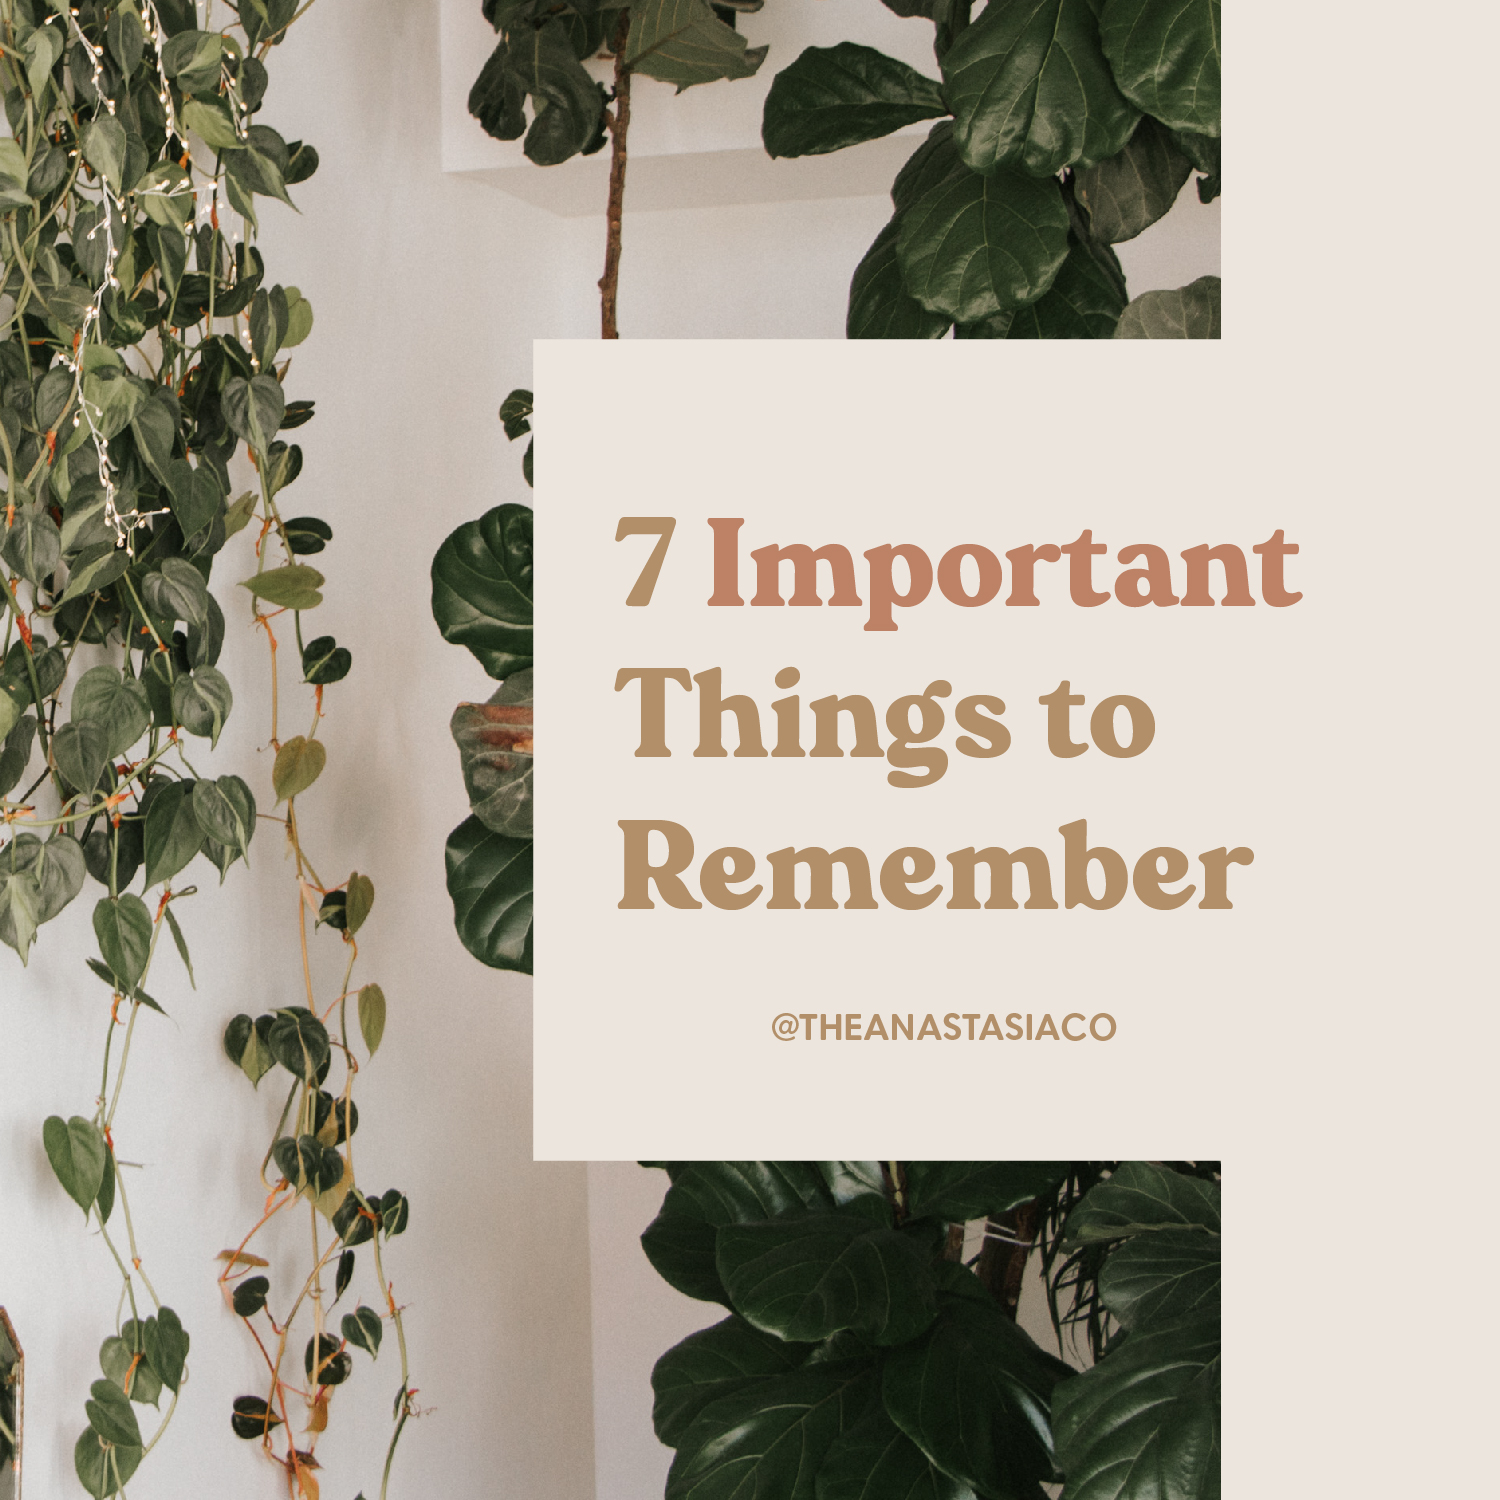 7 Inspiration and Motivational Quotes to Remember | The Anastasia Co